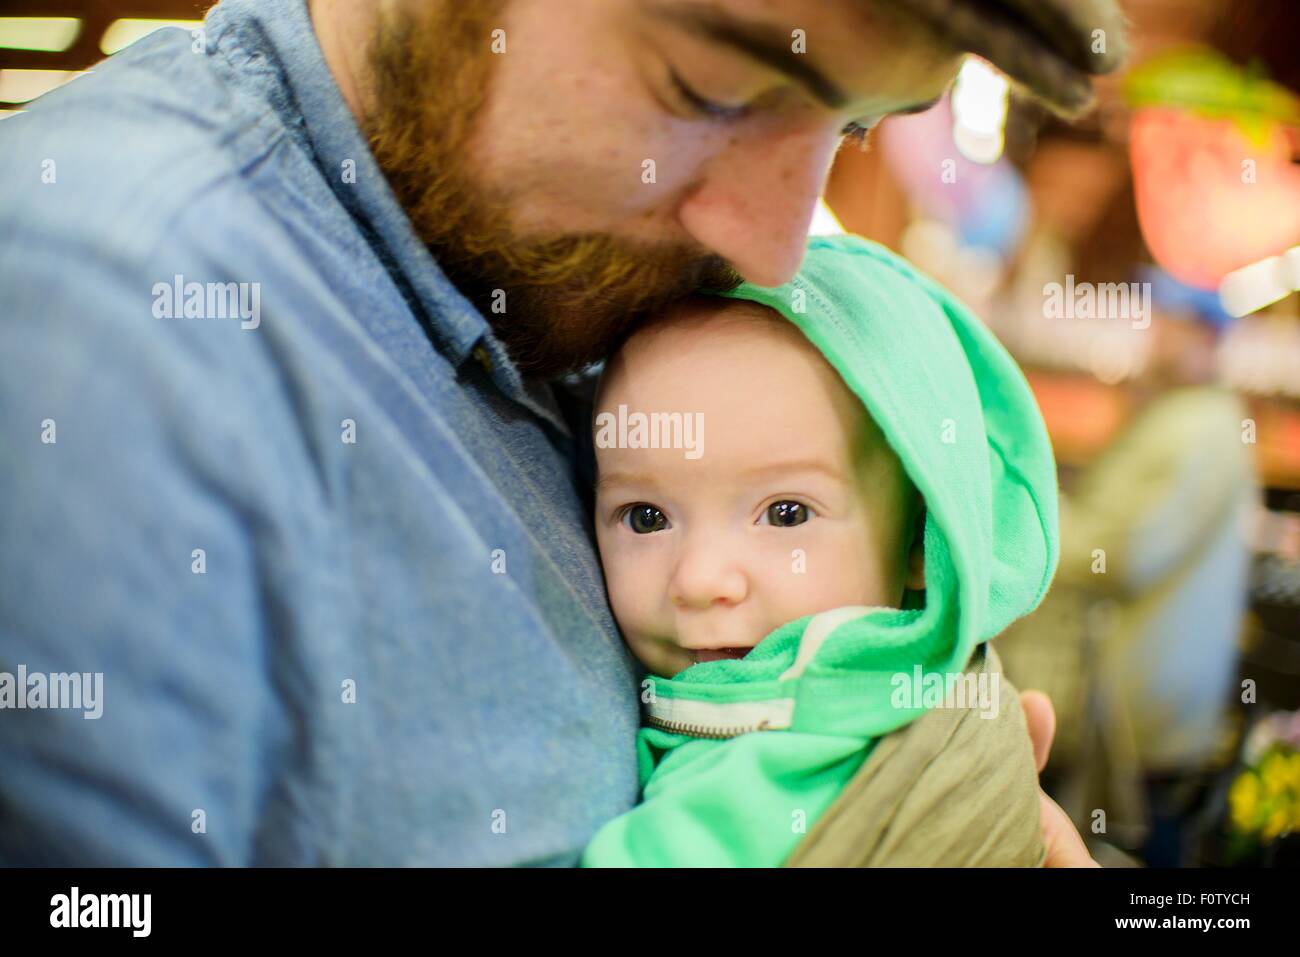 Father holding baby son, close up Stock Photo